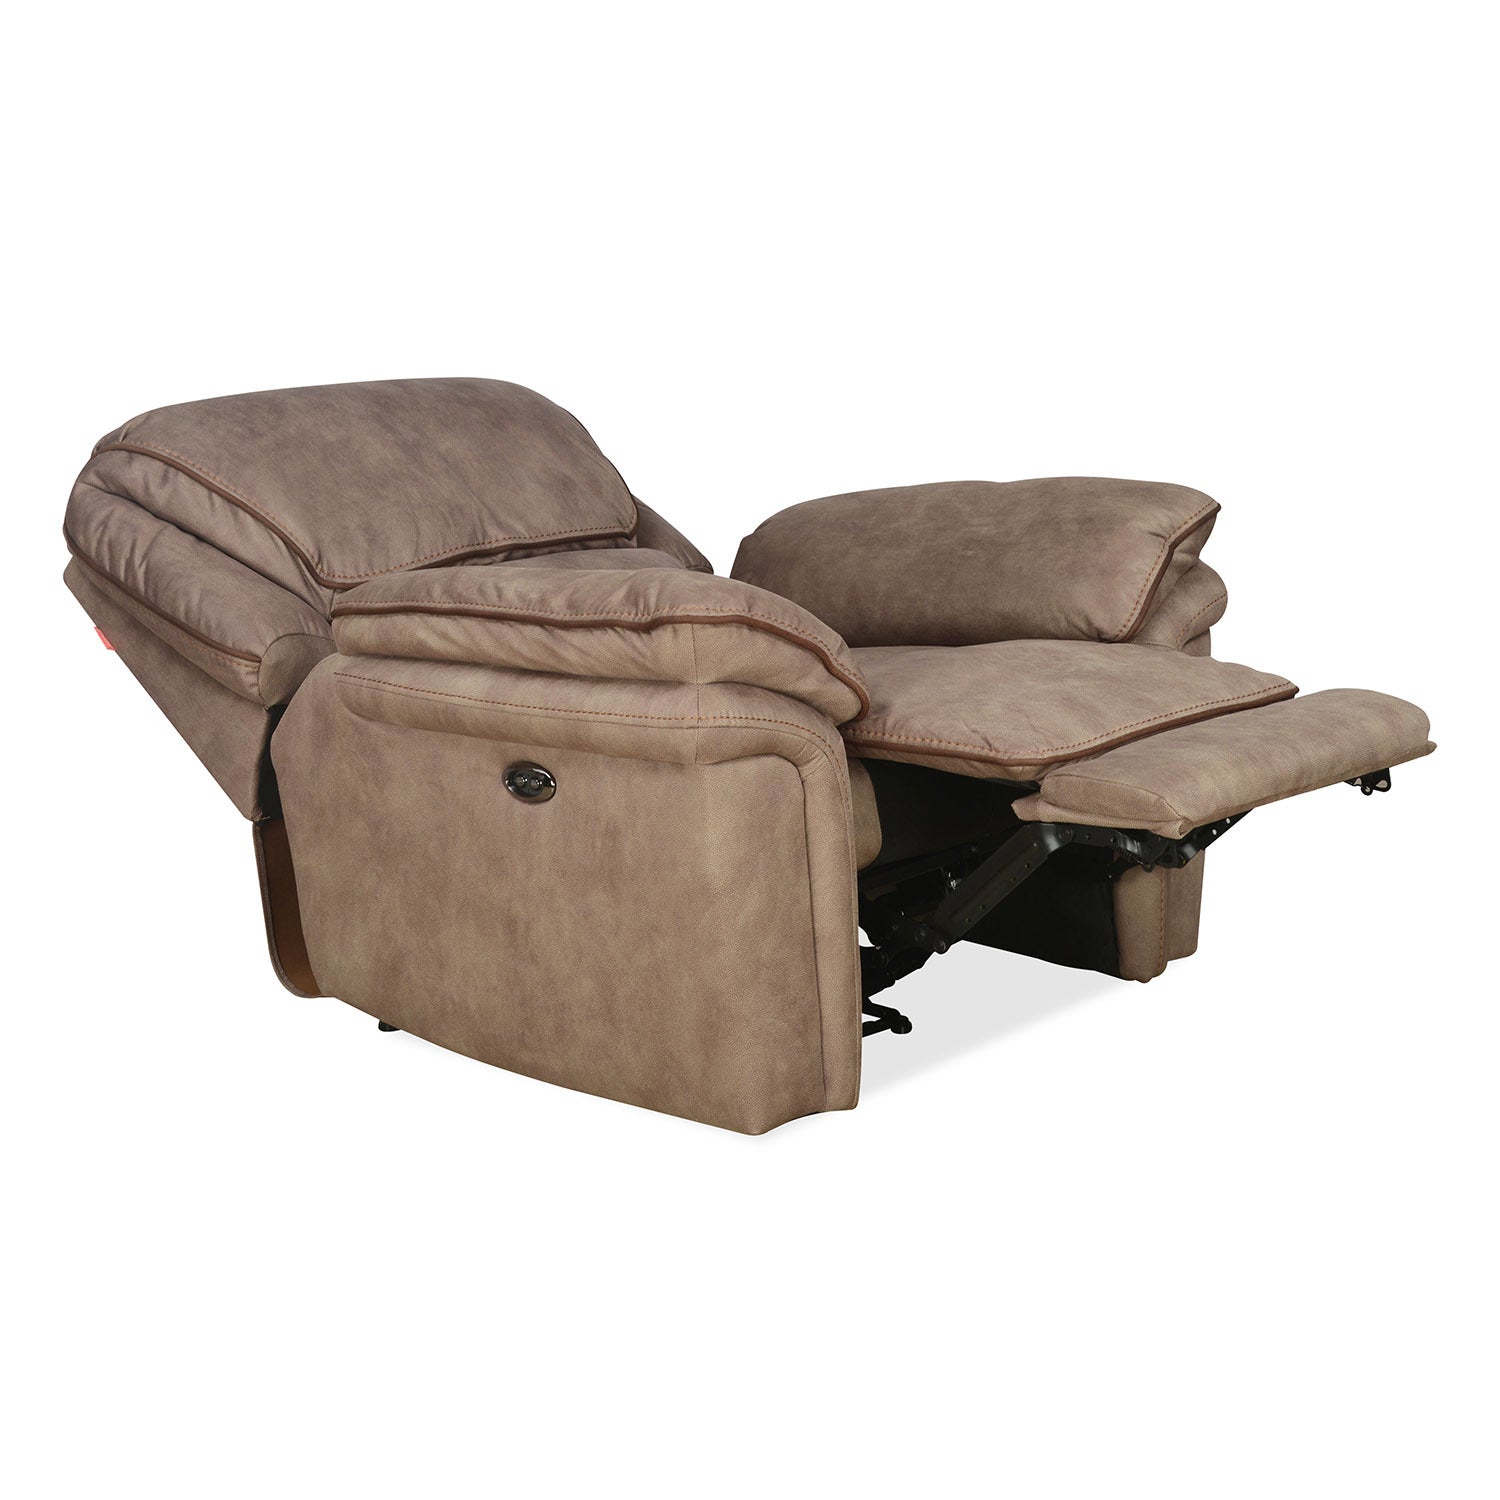 Fuzzy 1 Seater Sofa with Electric Recliner (Mocha Brown)